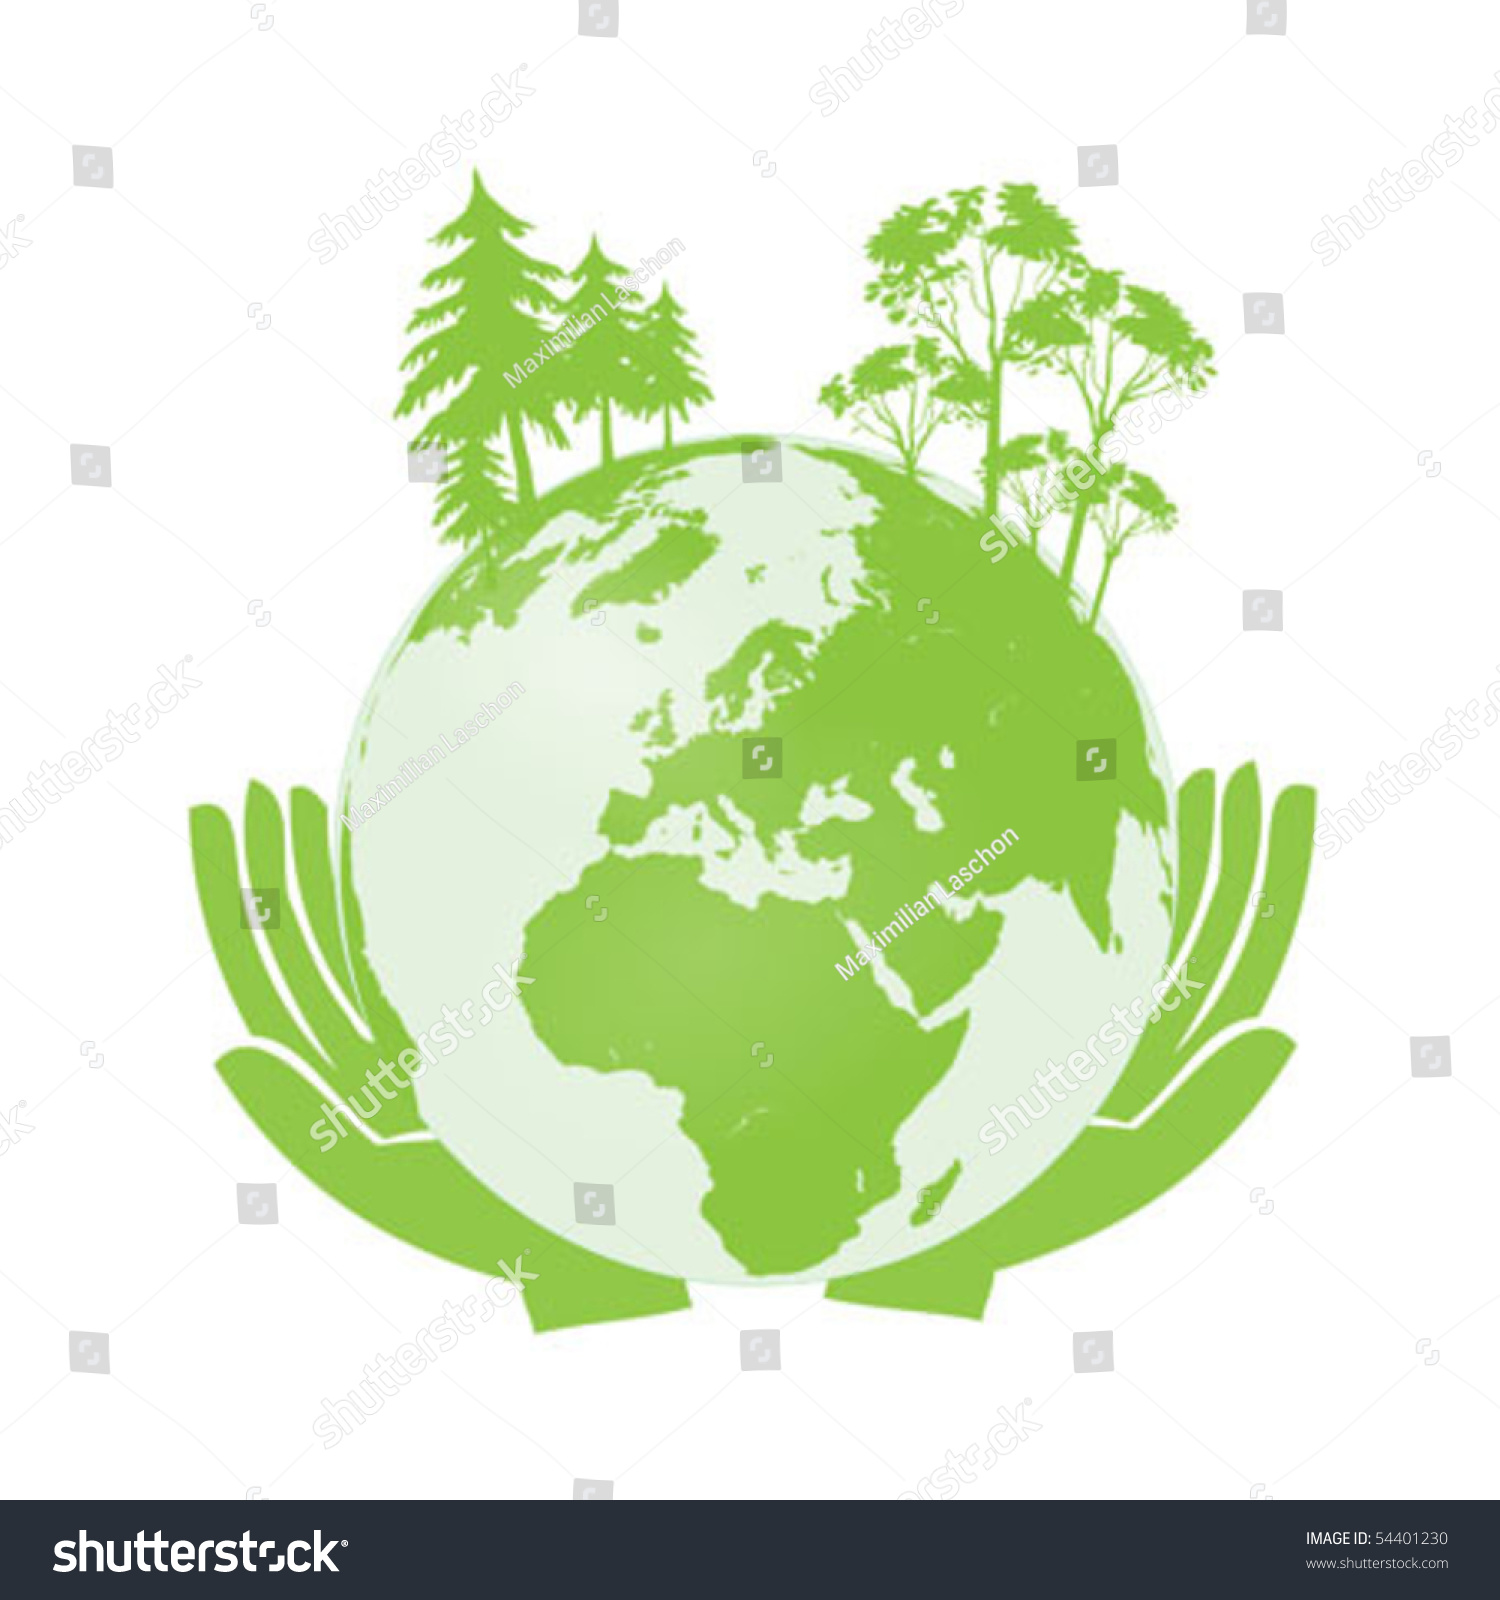 clipart save the earth - photo #31